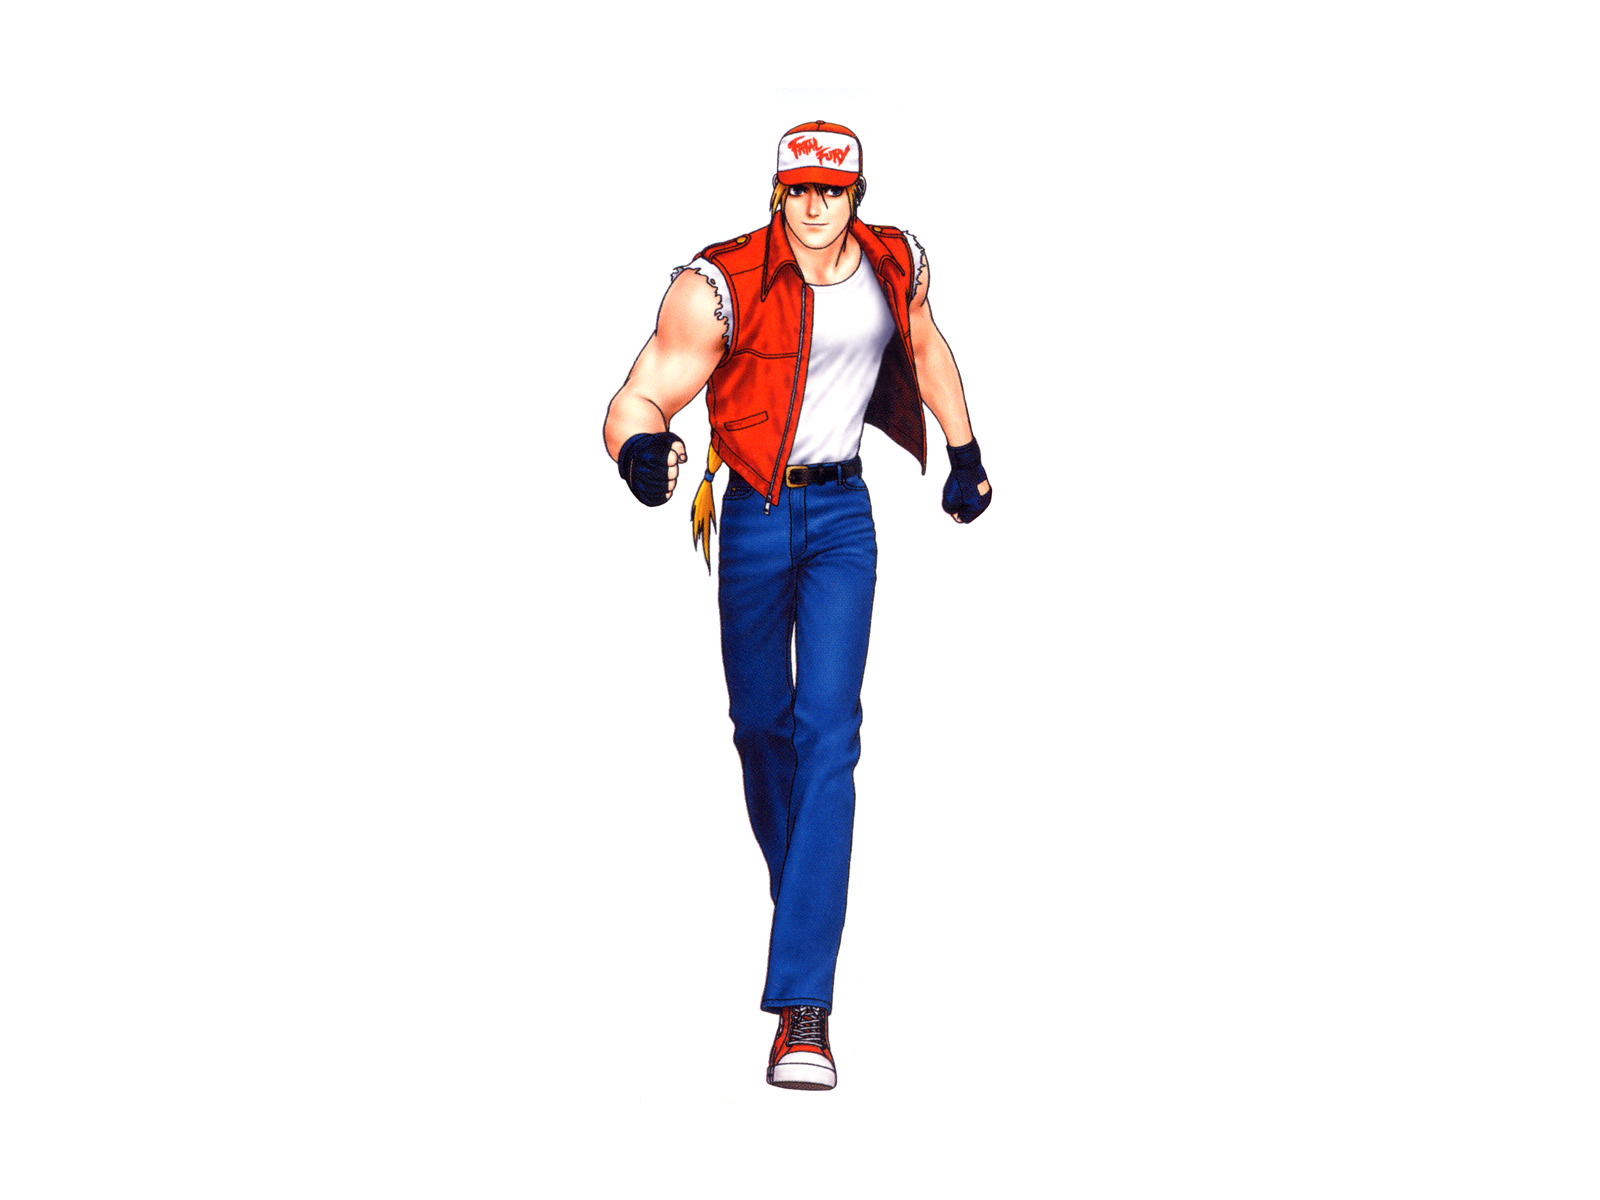 Video Game The King of Fighters HD Wallpaper | Background Image